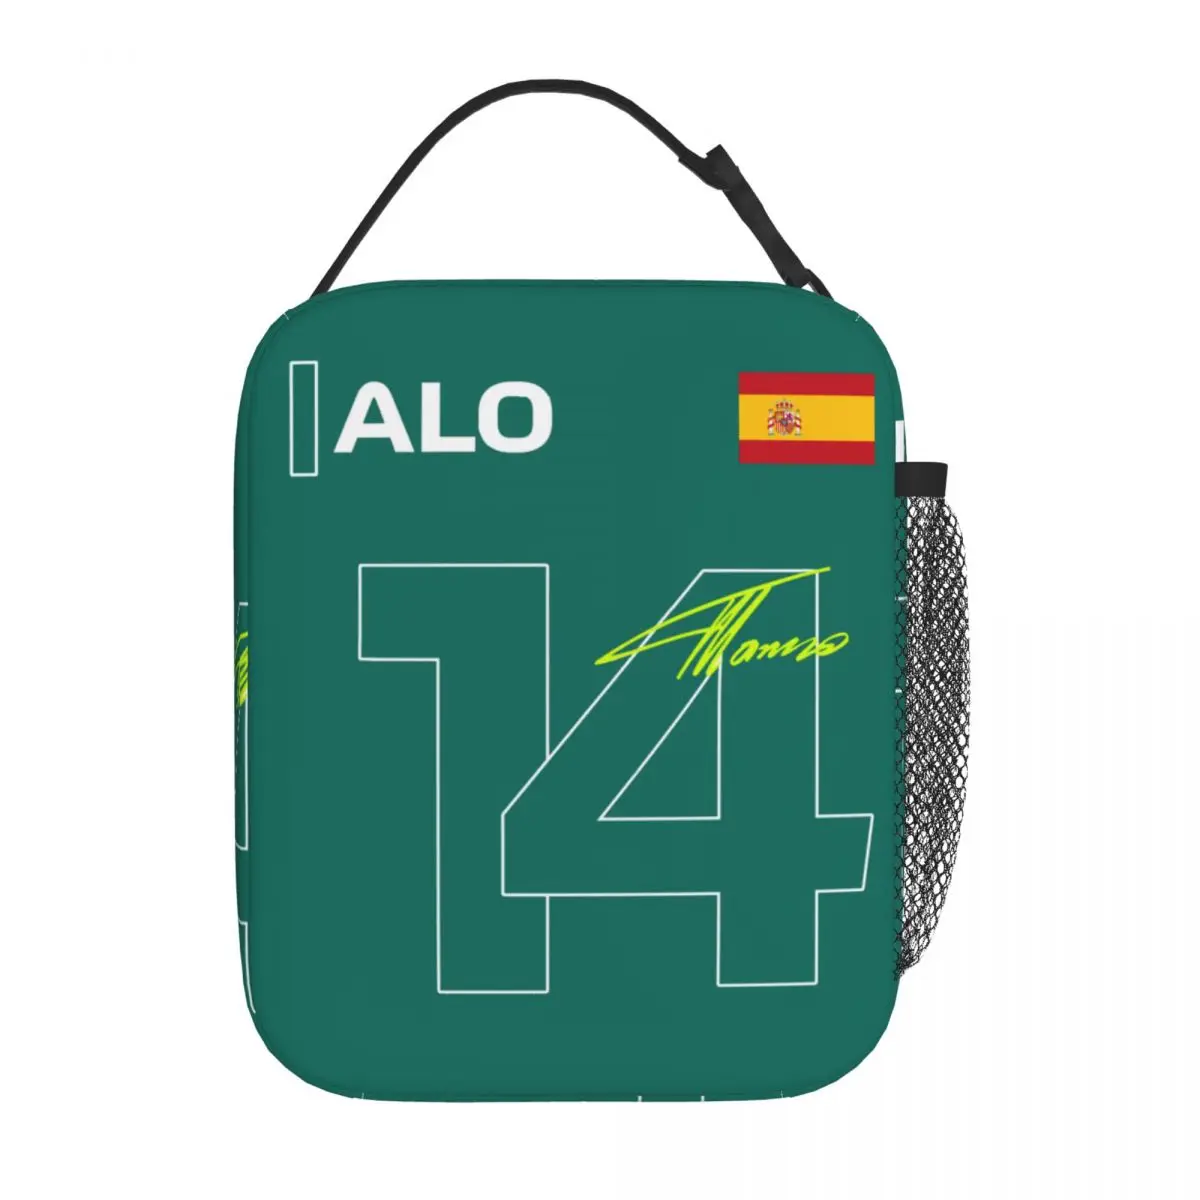 

F1 Spainish Racer Fernando Alonso Merch Insulated Lunch Bag School Lunch Container Multifunction Casual Cooler Thermal Bento Box